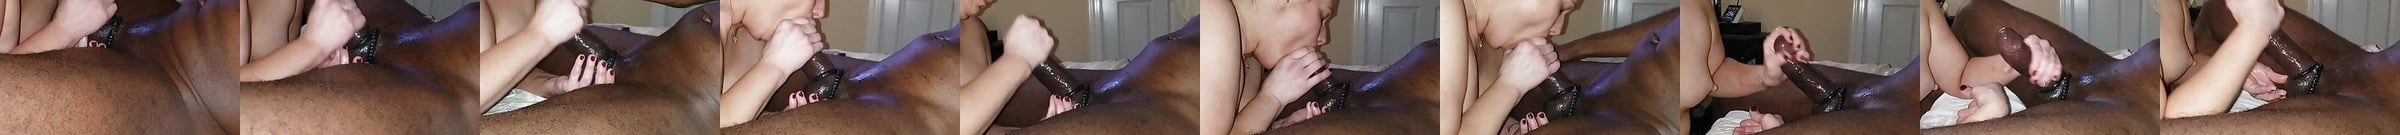 White Bbc Cumslut Wife Swallows Another Black Load Porn 61